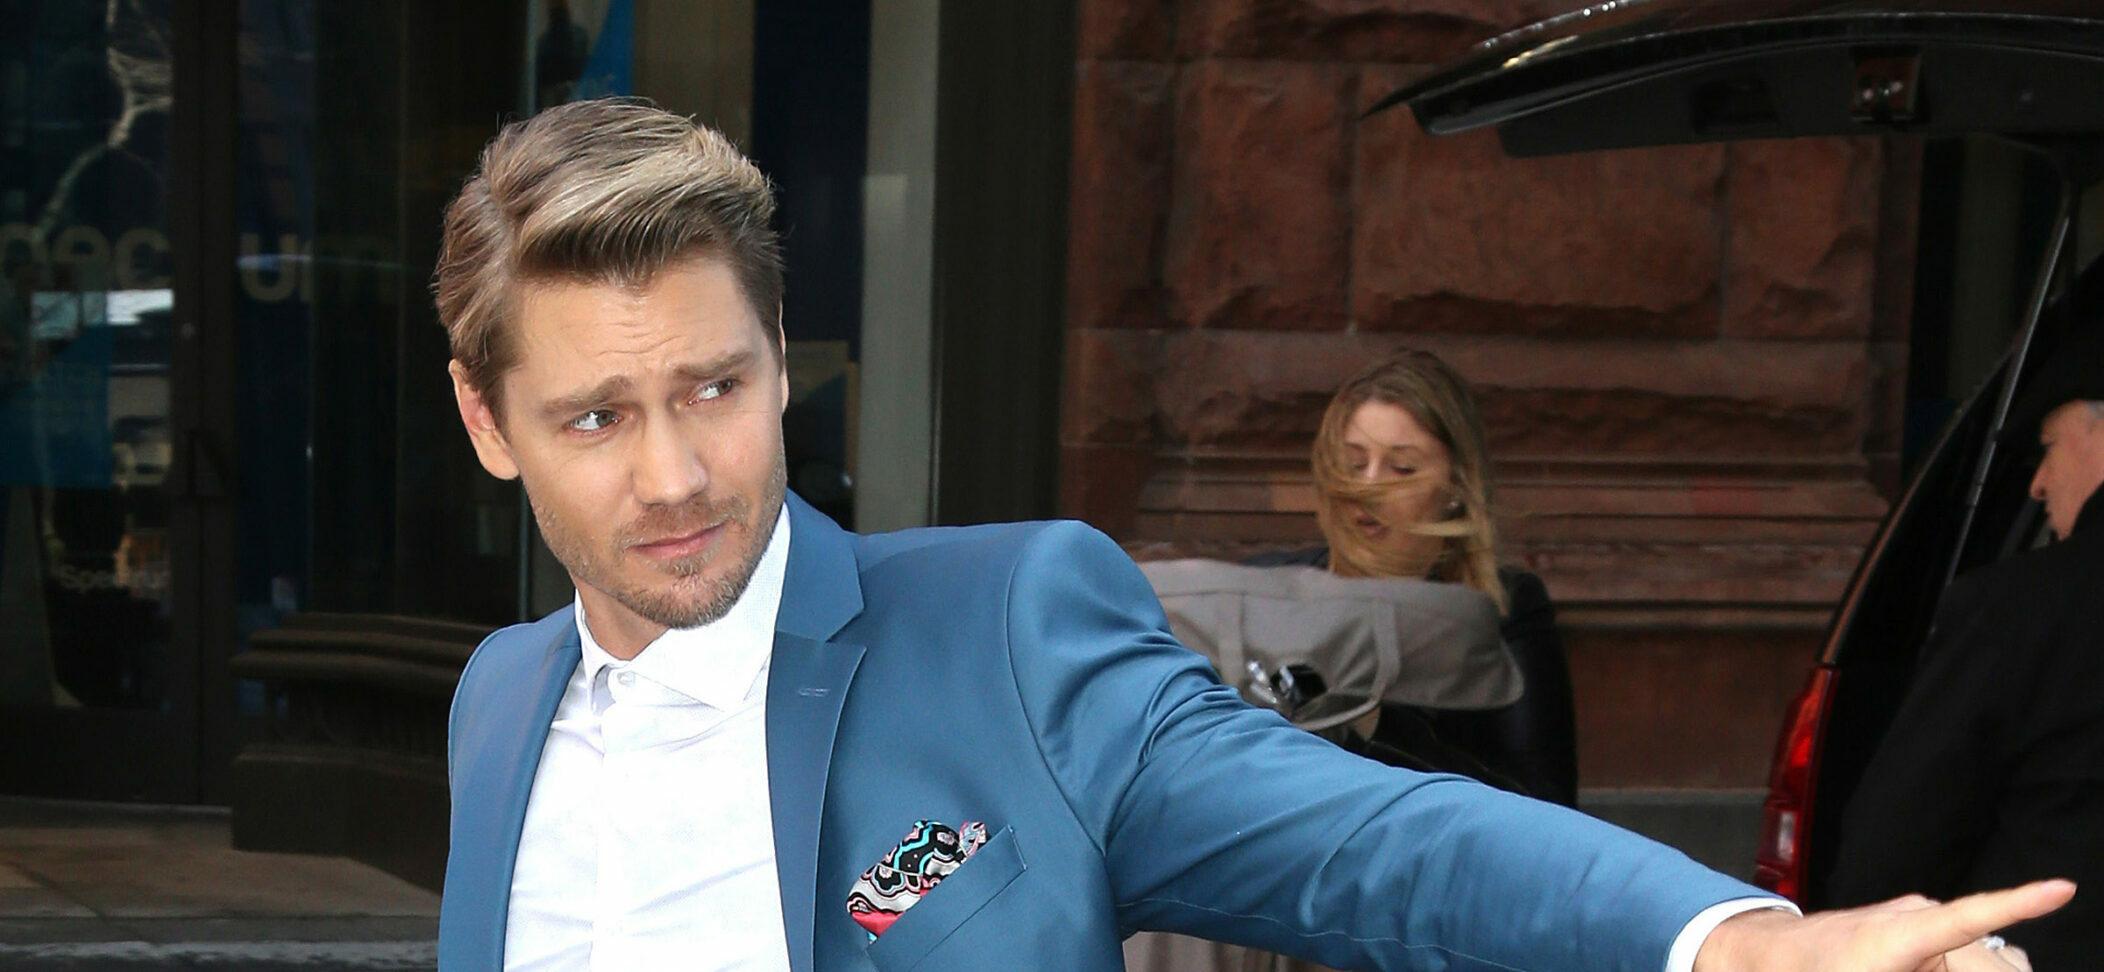 Chad Michael Murray at AOL Building in New York City